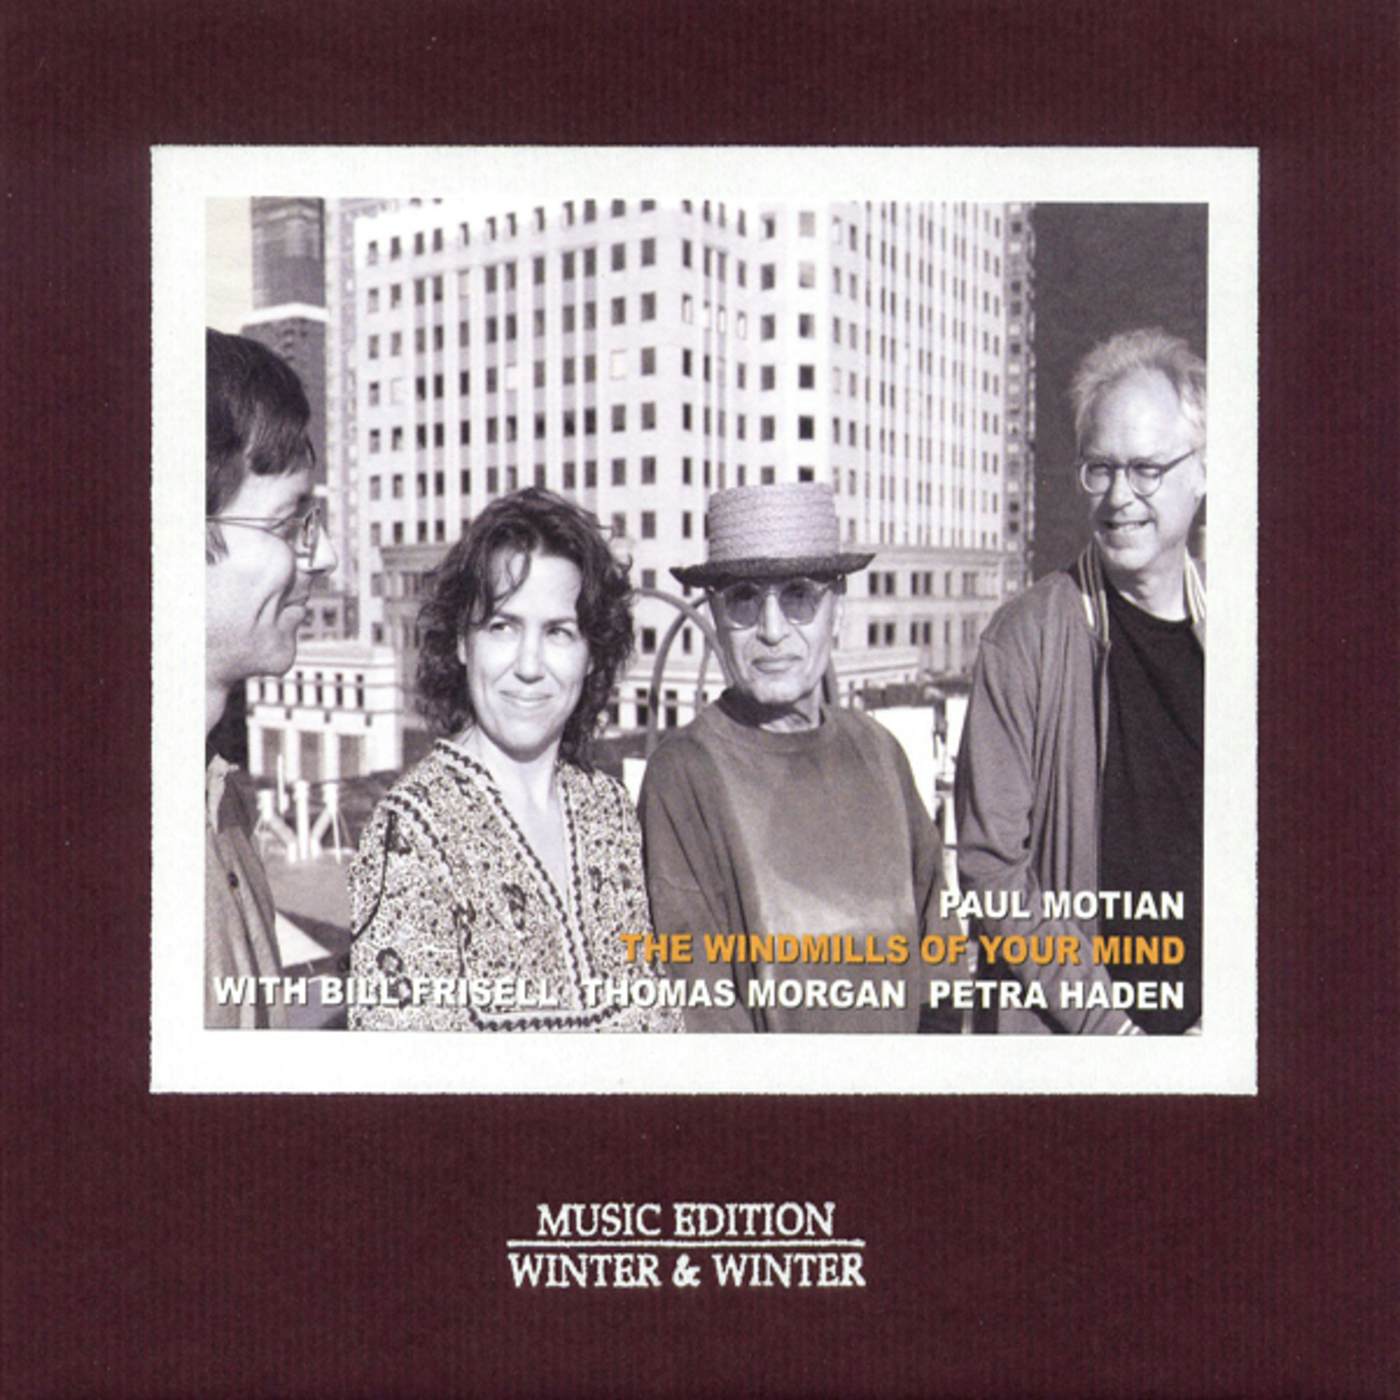 Paul Motian WINDMILLS OF YOUR MIND CD